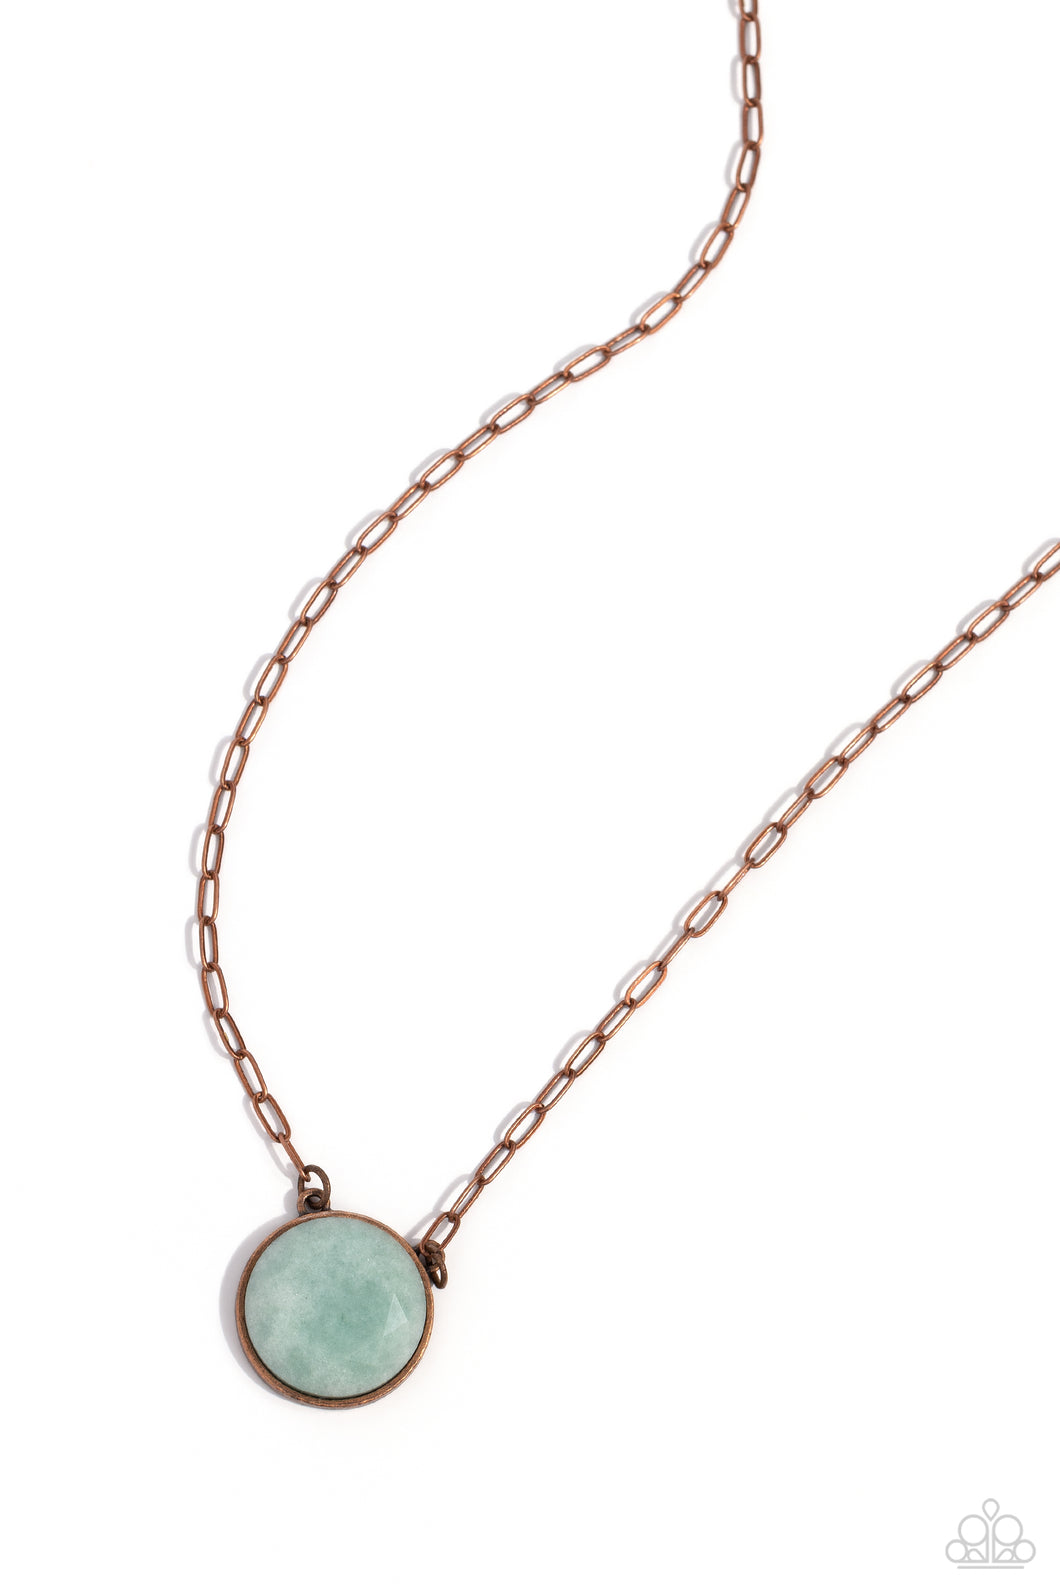 Suspended Stone - Copper (Light Blue Stone) Necklace